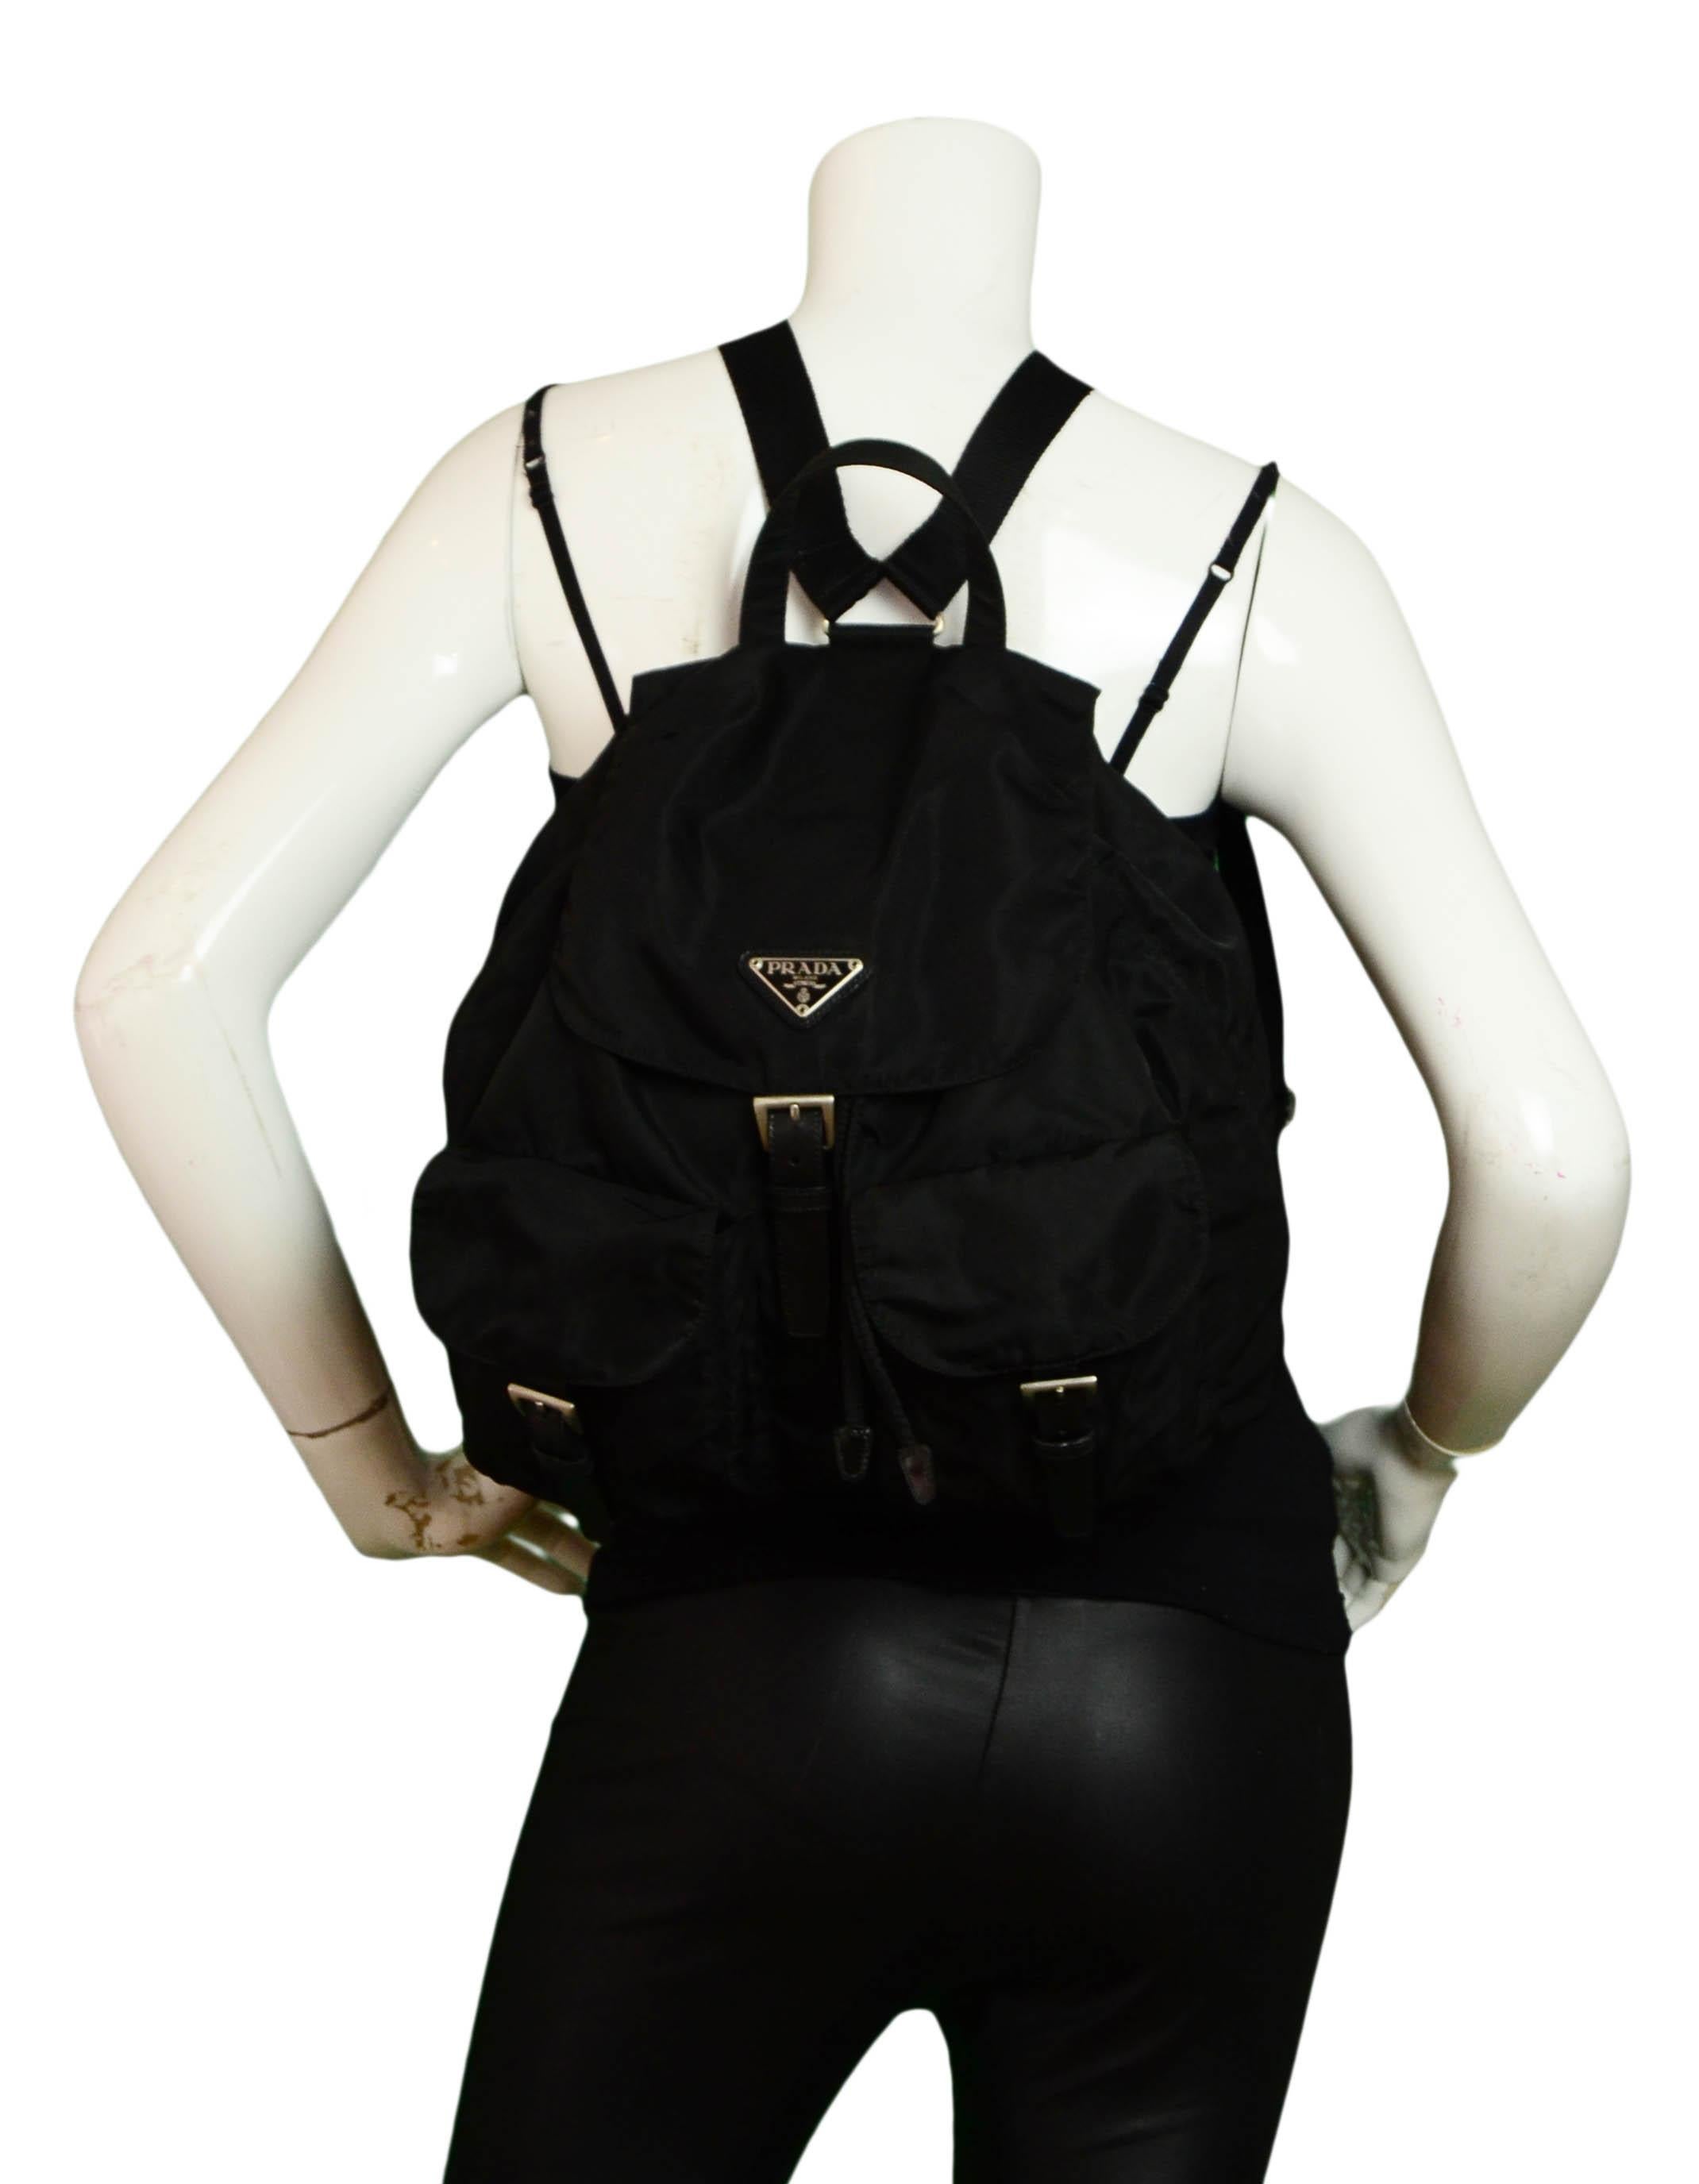 Prada Black Nylon Double Pocket Backpack Bag

Made In: Italy
Year of Production: Vintage
Color: Black
Hardware: Silvertone
Materials: Nylon & leather
Lining: Textile
Closure/Opening: Drawstring & magnetic snap w/ buckle
Exterior Pockets: Two snap &